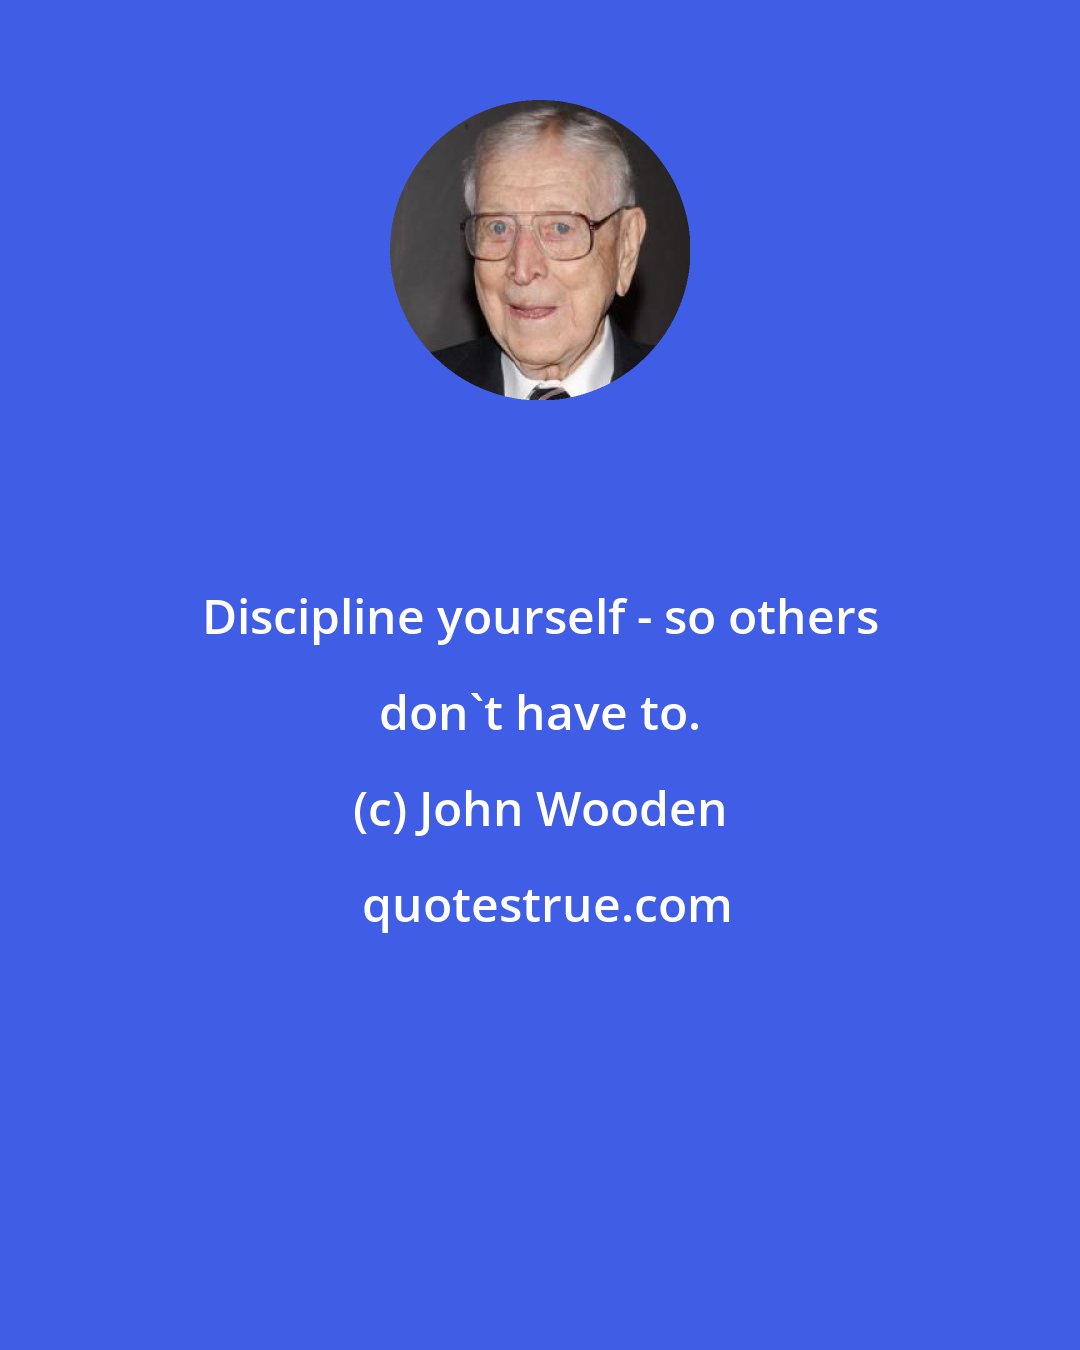 John Wooden: Discipline yourself - so others don't have to.